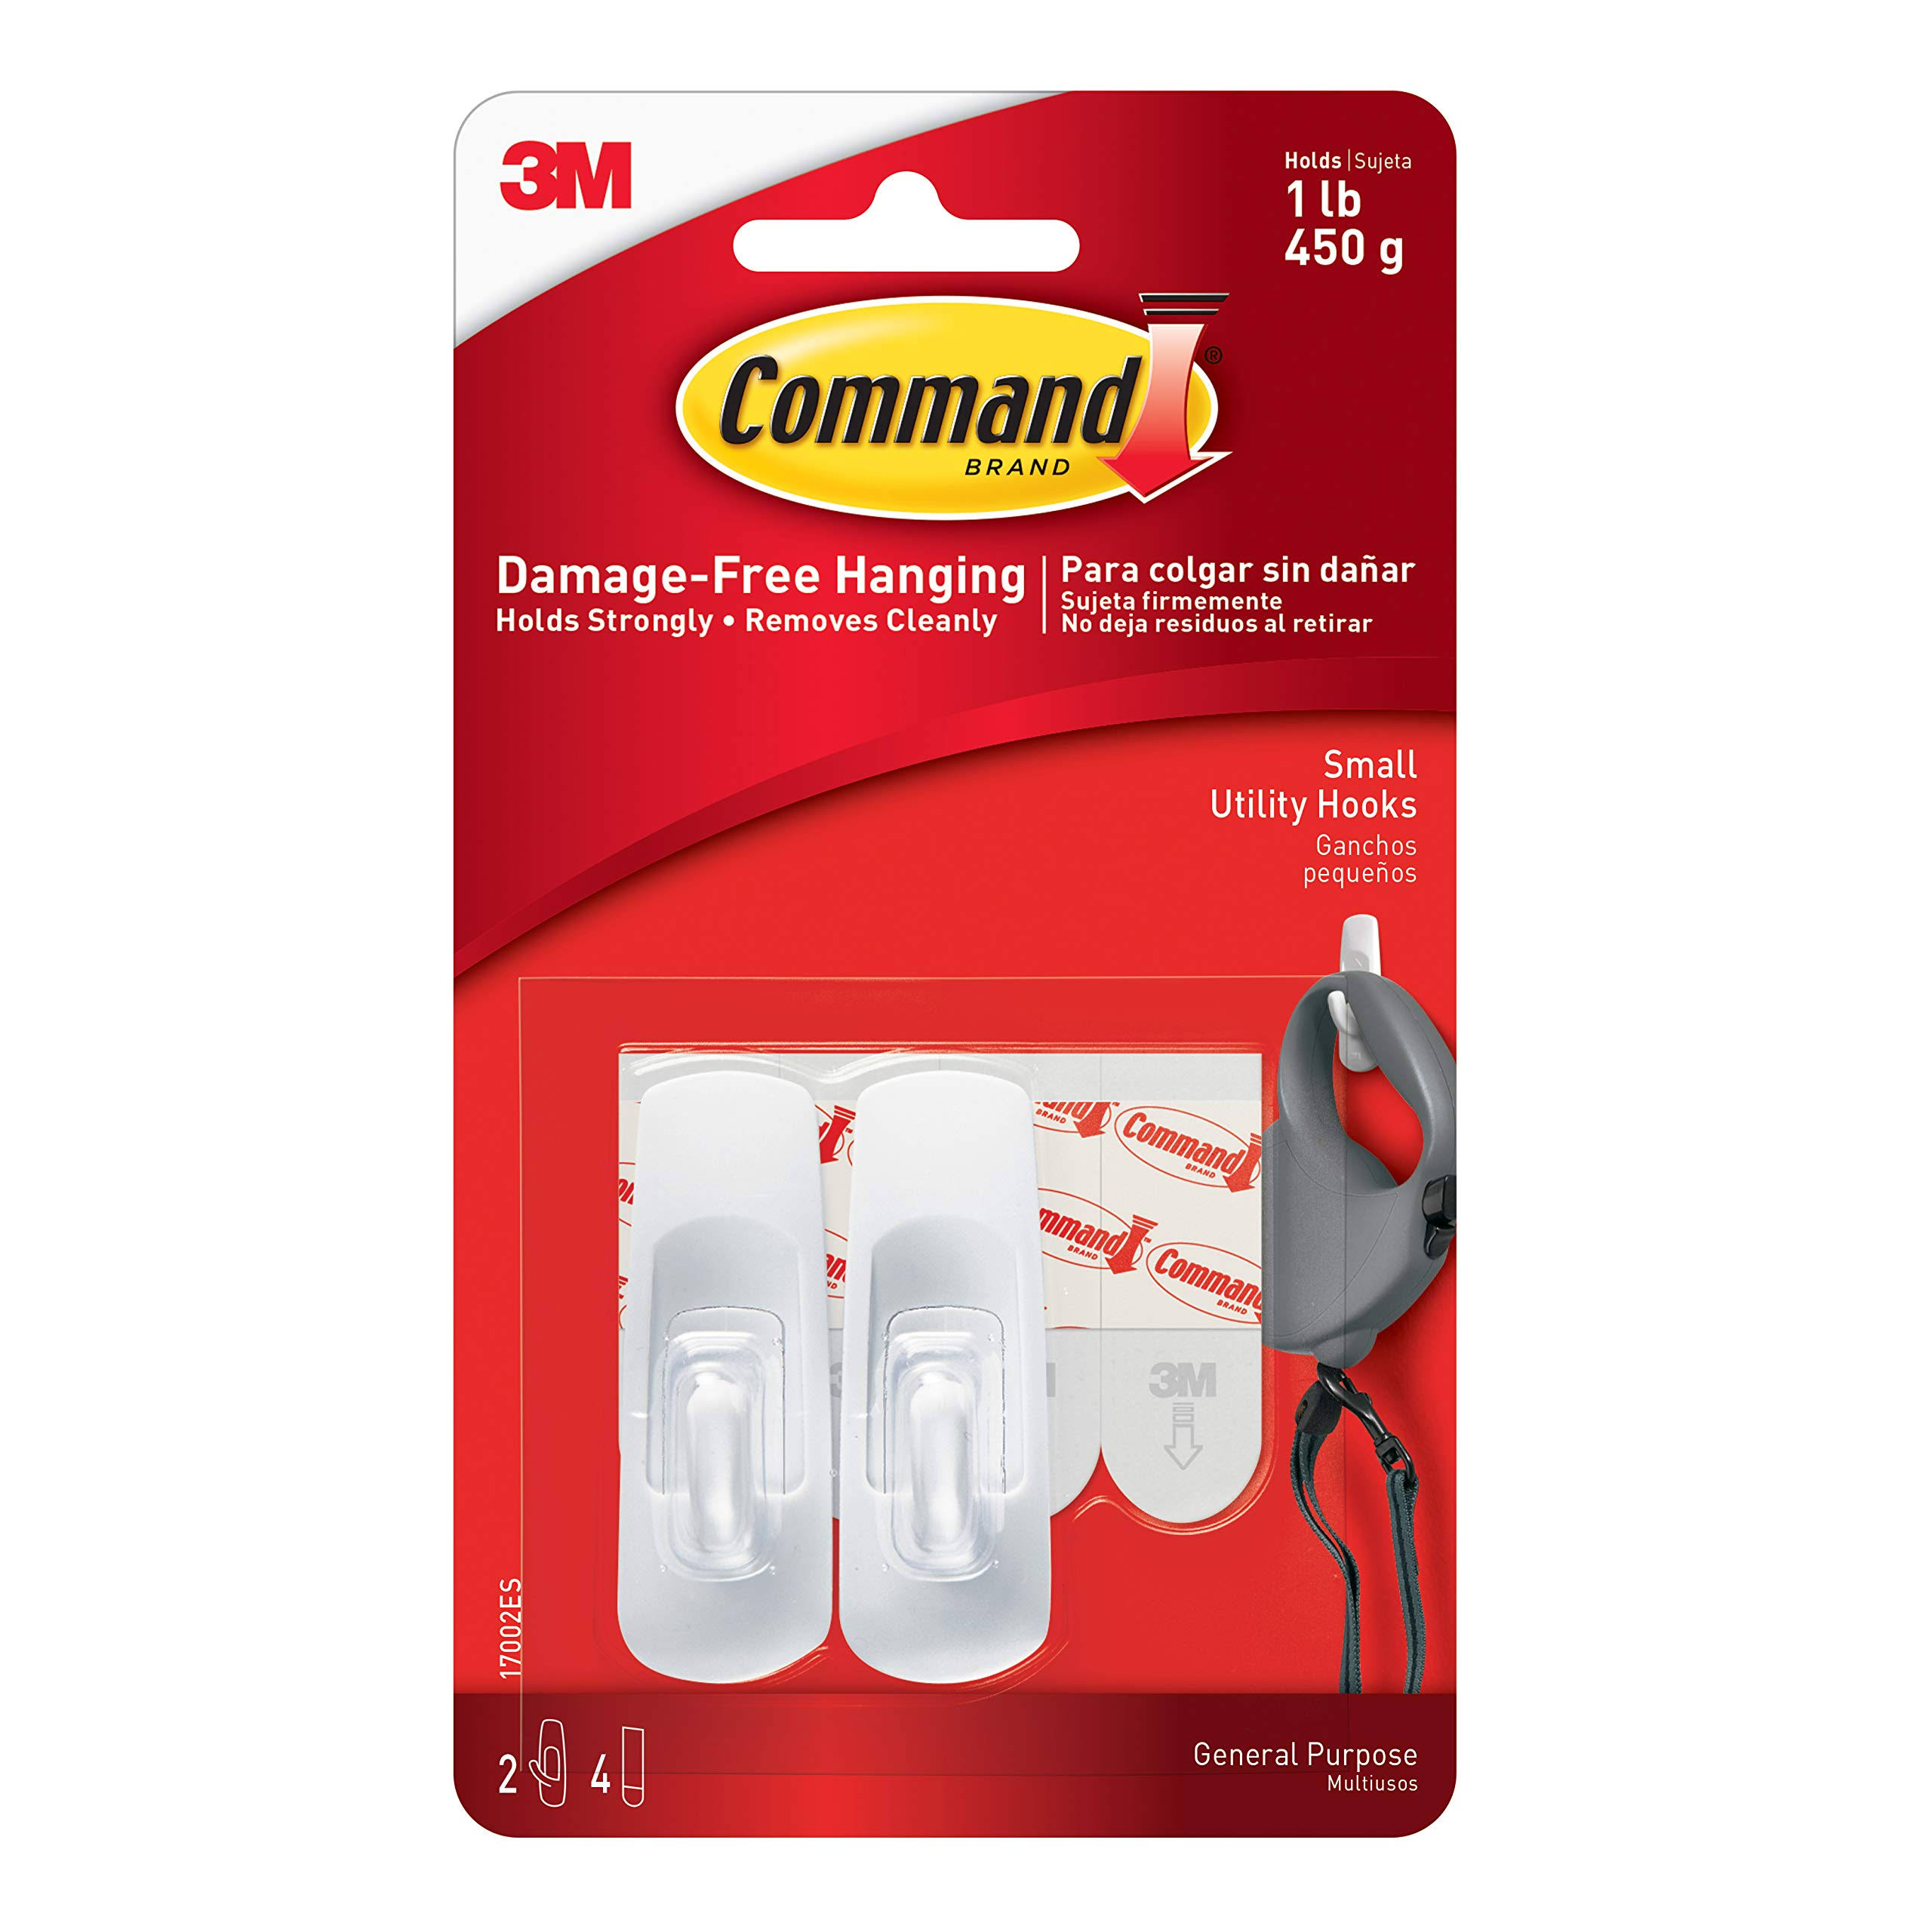 3M Company Command Adhesive Reusable Small Hooks - Pack of 2